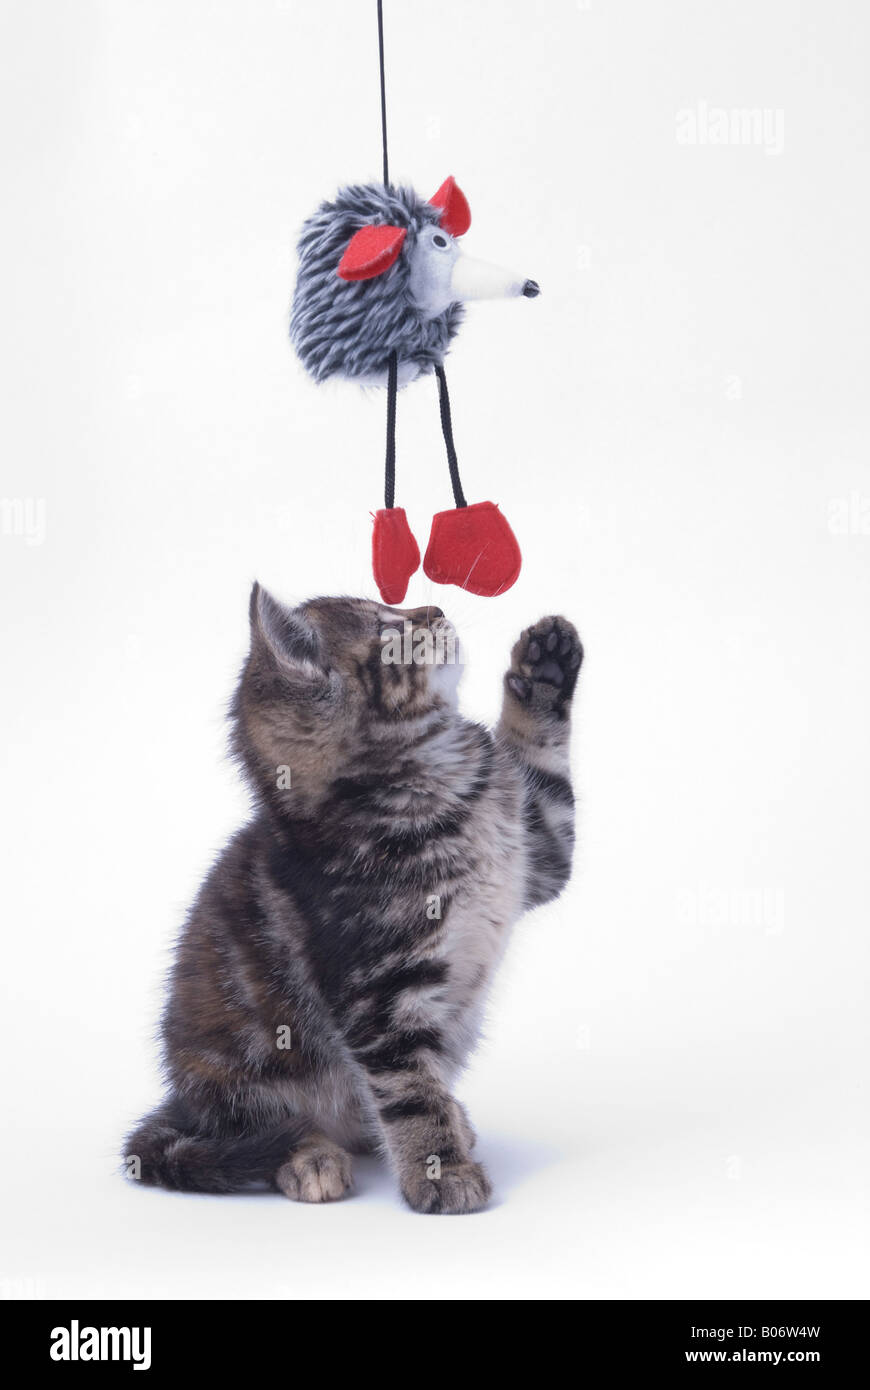 Eight week old tabby kitten tentatively playing with a mouse toy Stock Photo